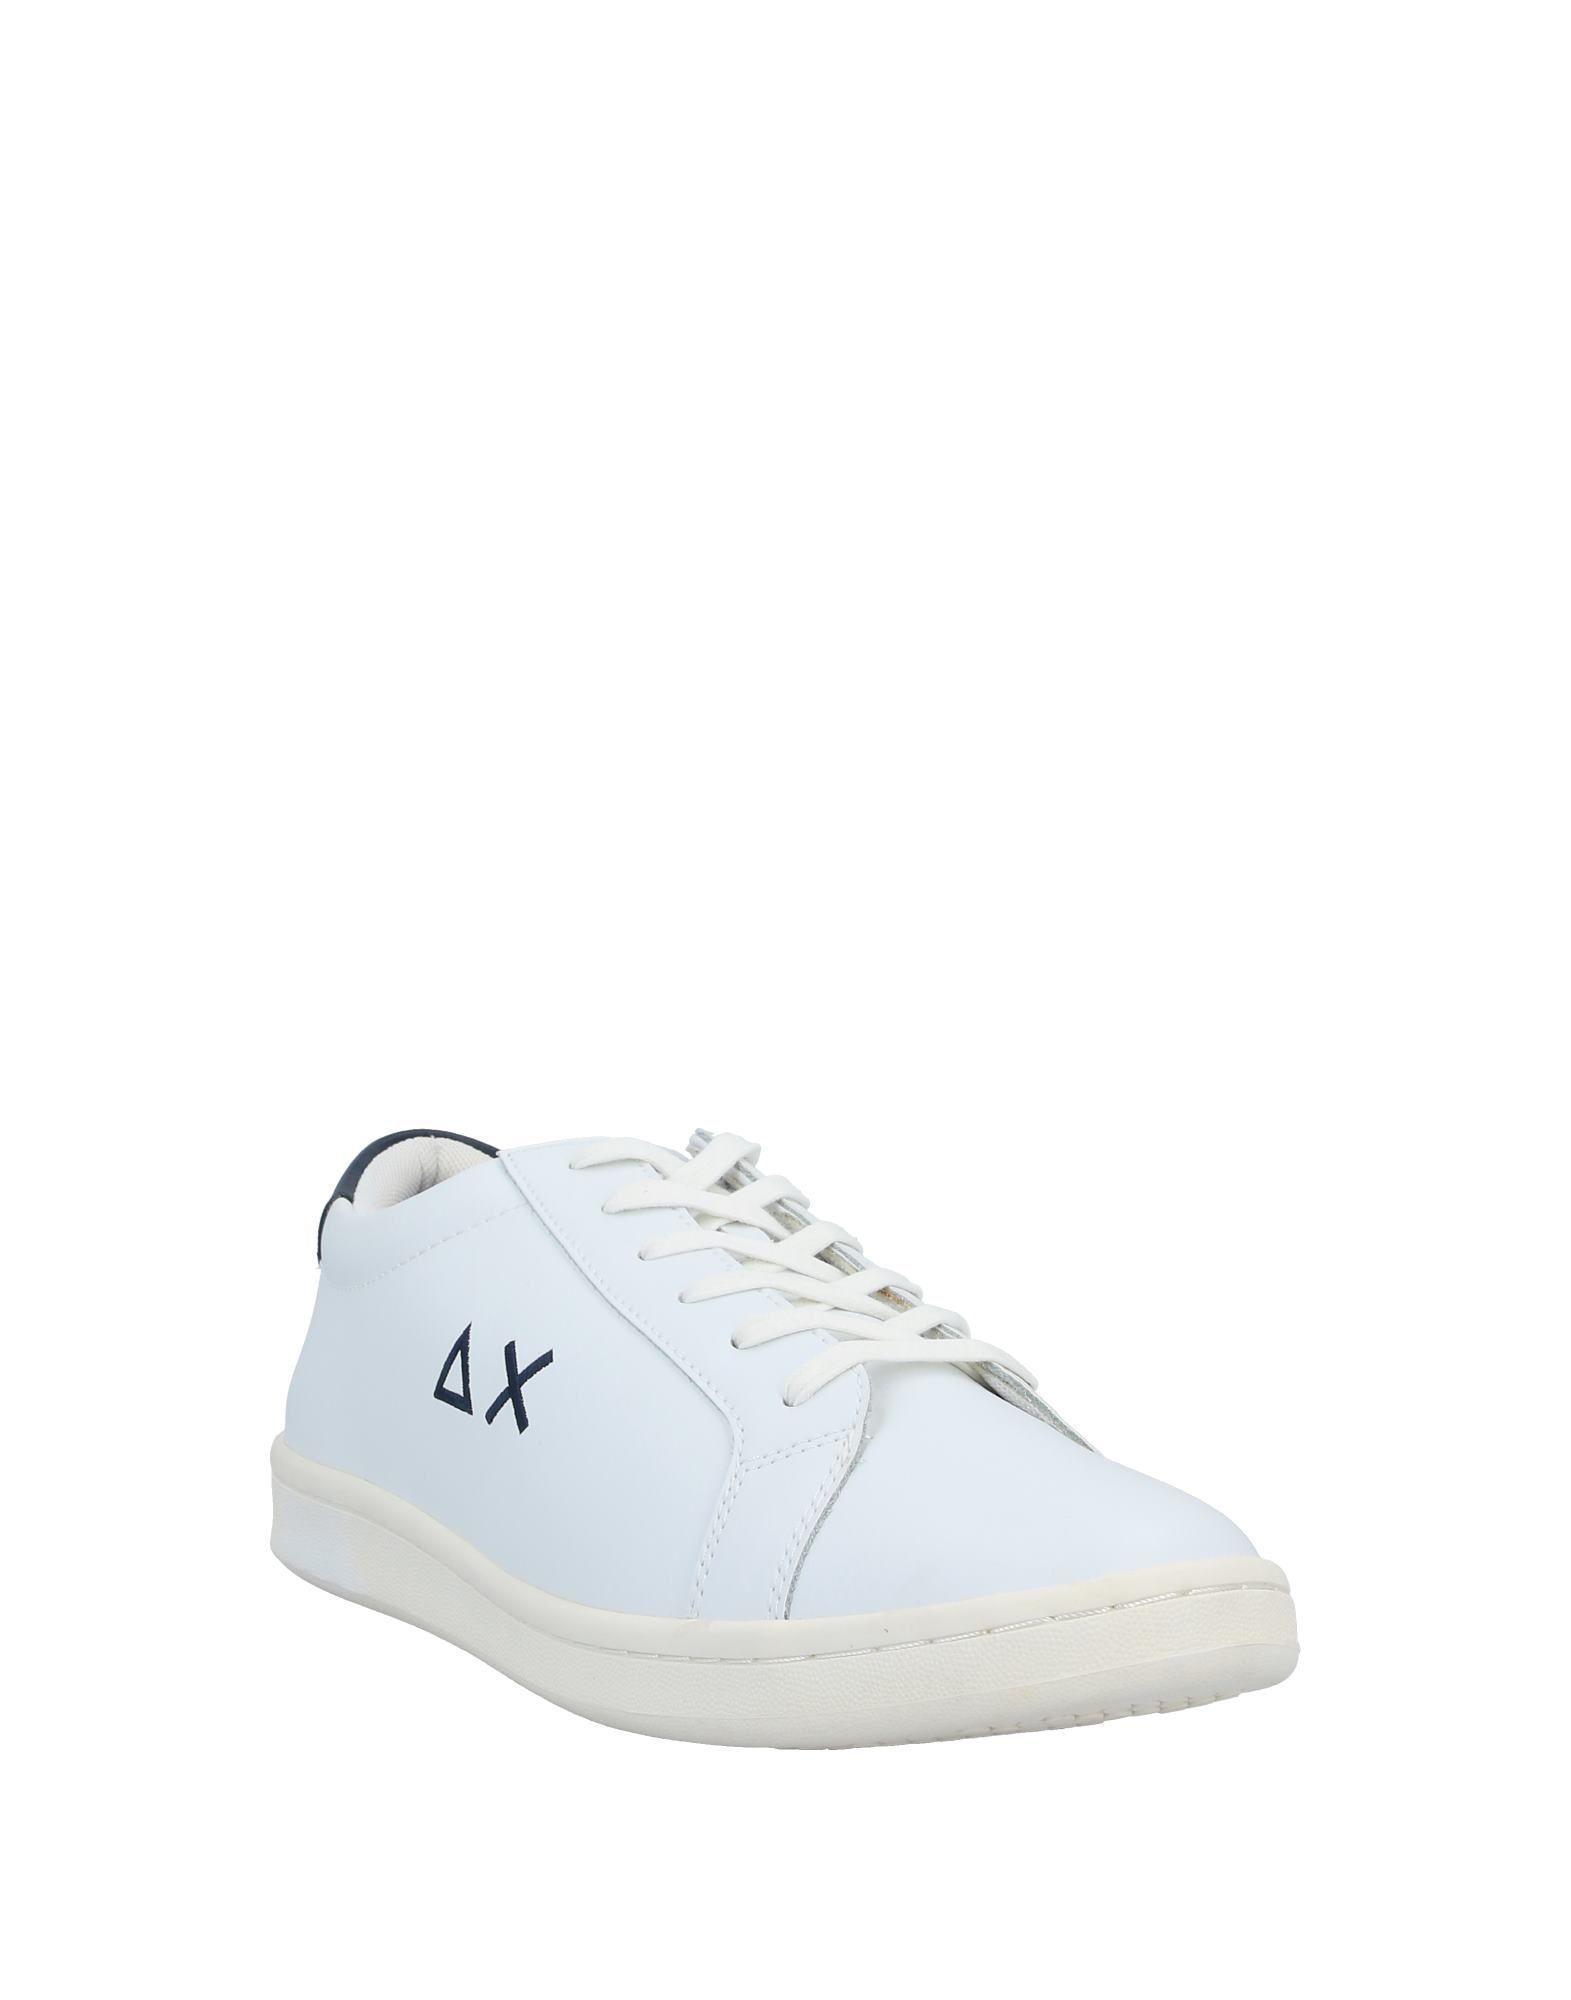 Sun 68 Low-tops & Sneakers in White for Men - Lyst